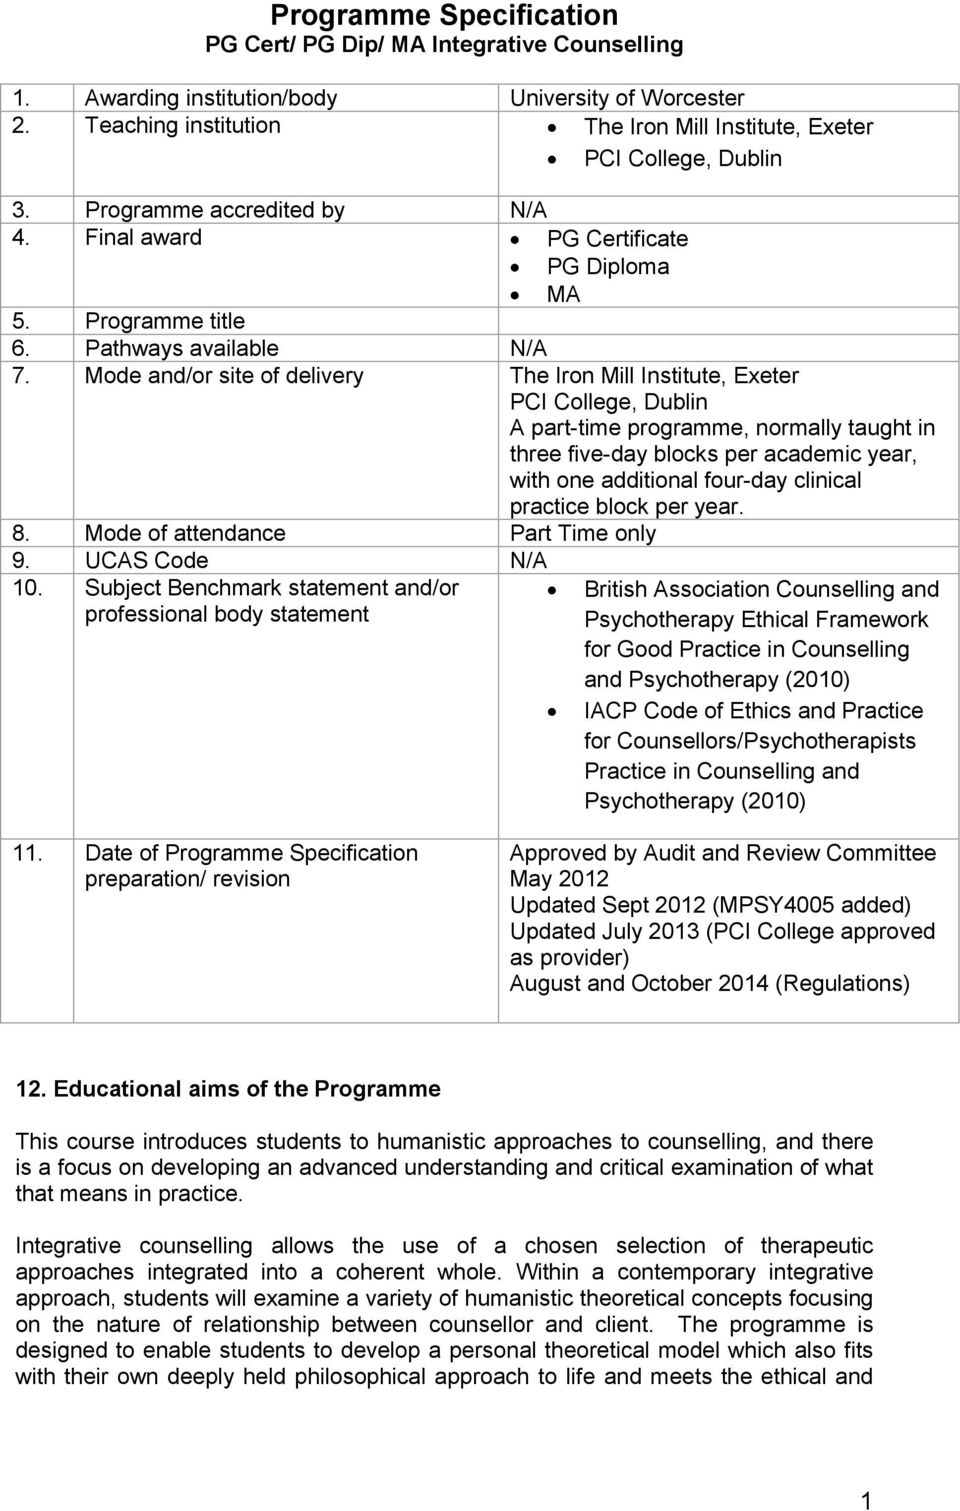 Mode and/or site of delivery The Iron Mill Institute, Exeter PCI College, Dublin A part-time programme, normally taught in three five-day blocks per academic year, with one additional four-day